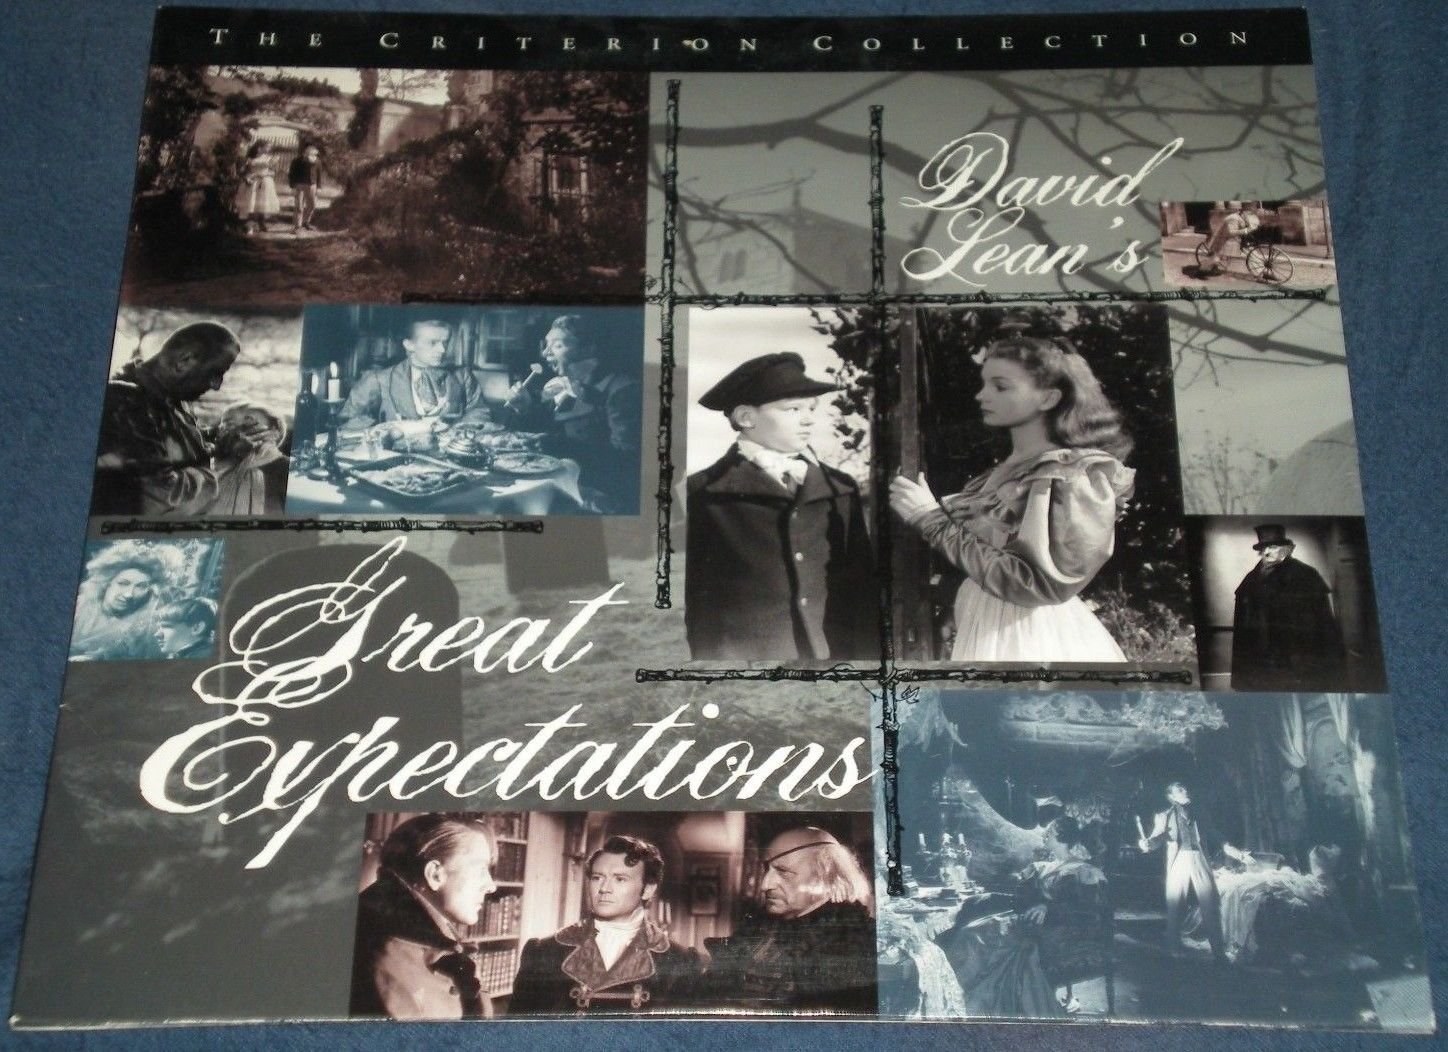 GREAT EXPECTATIONS Criterion Collection Laserdisc David Lean 1946 John Mills